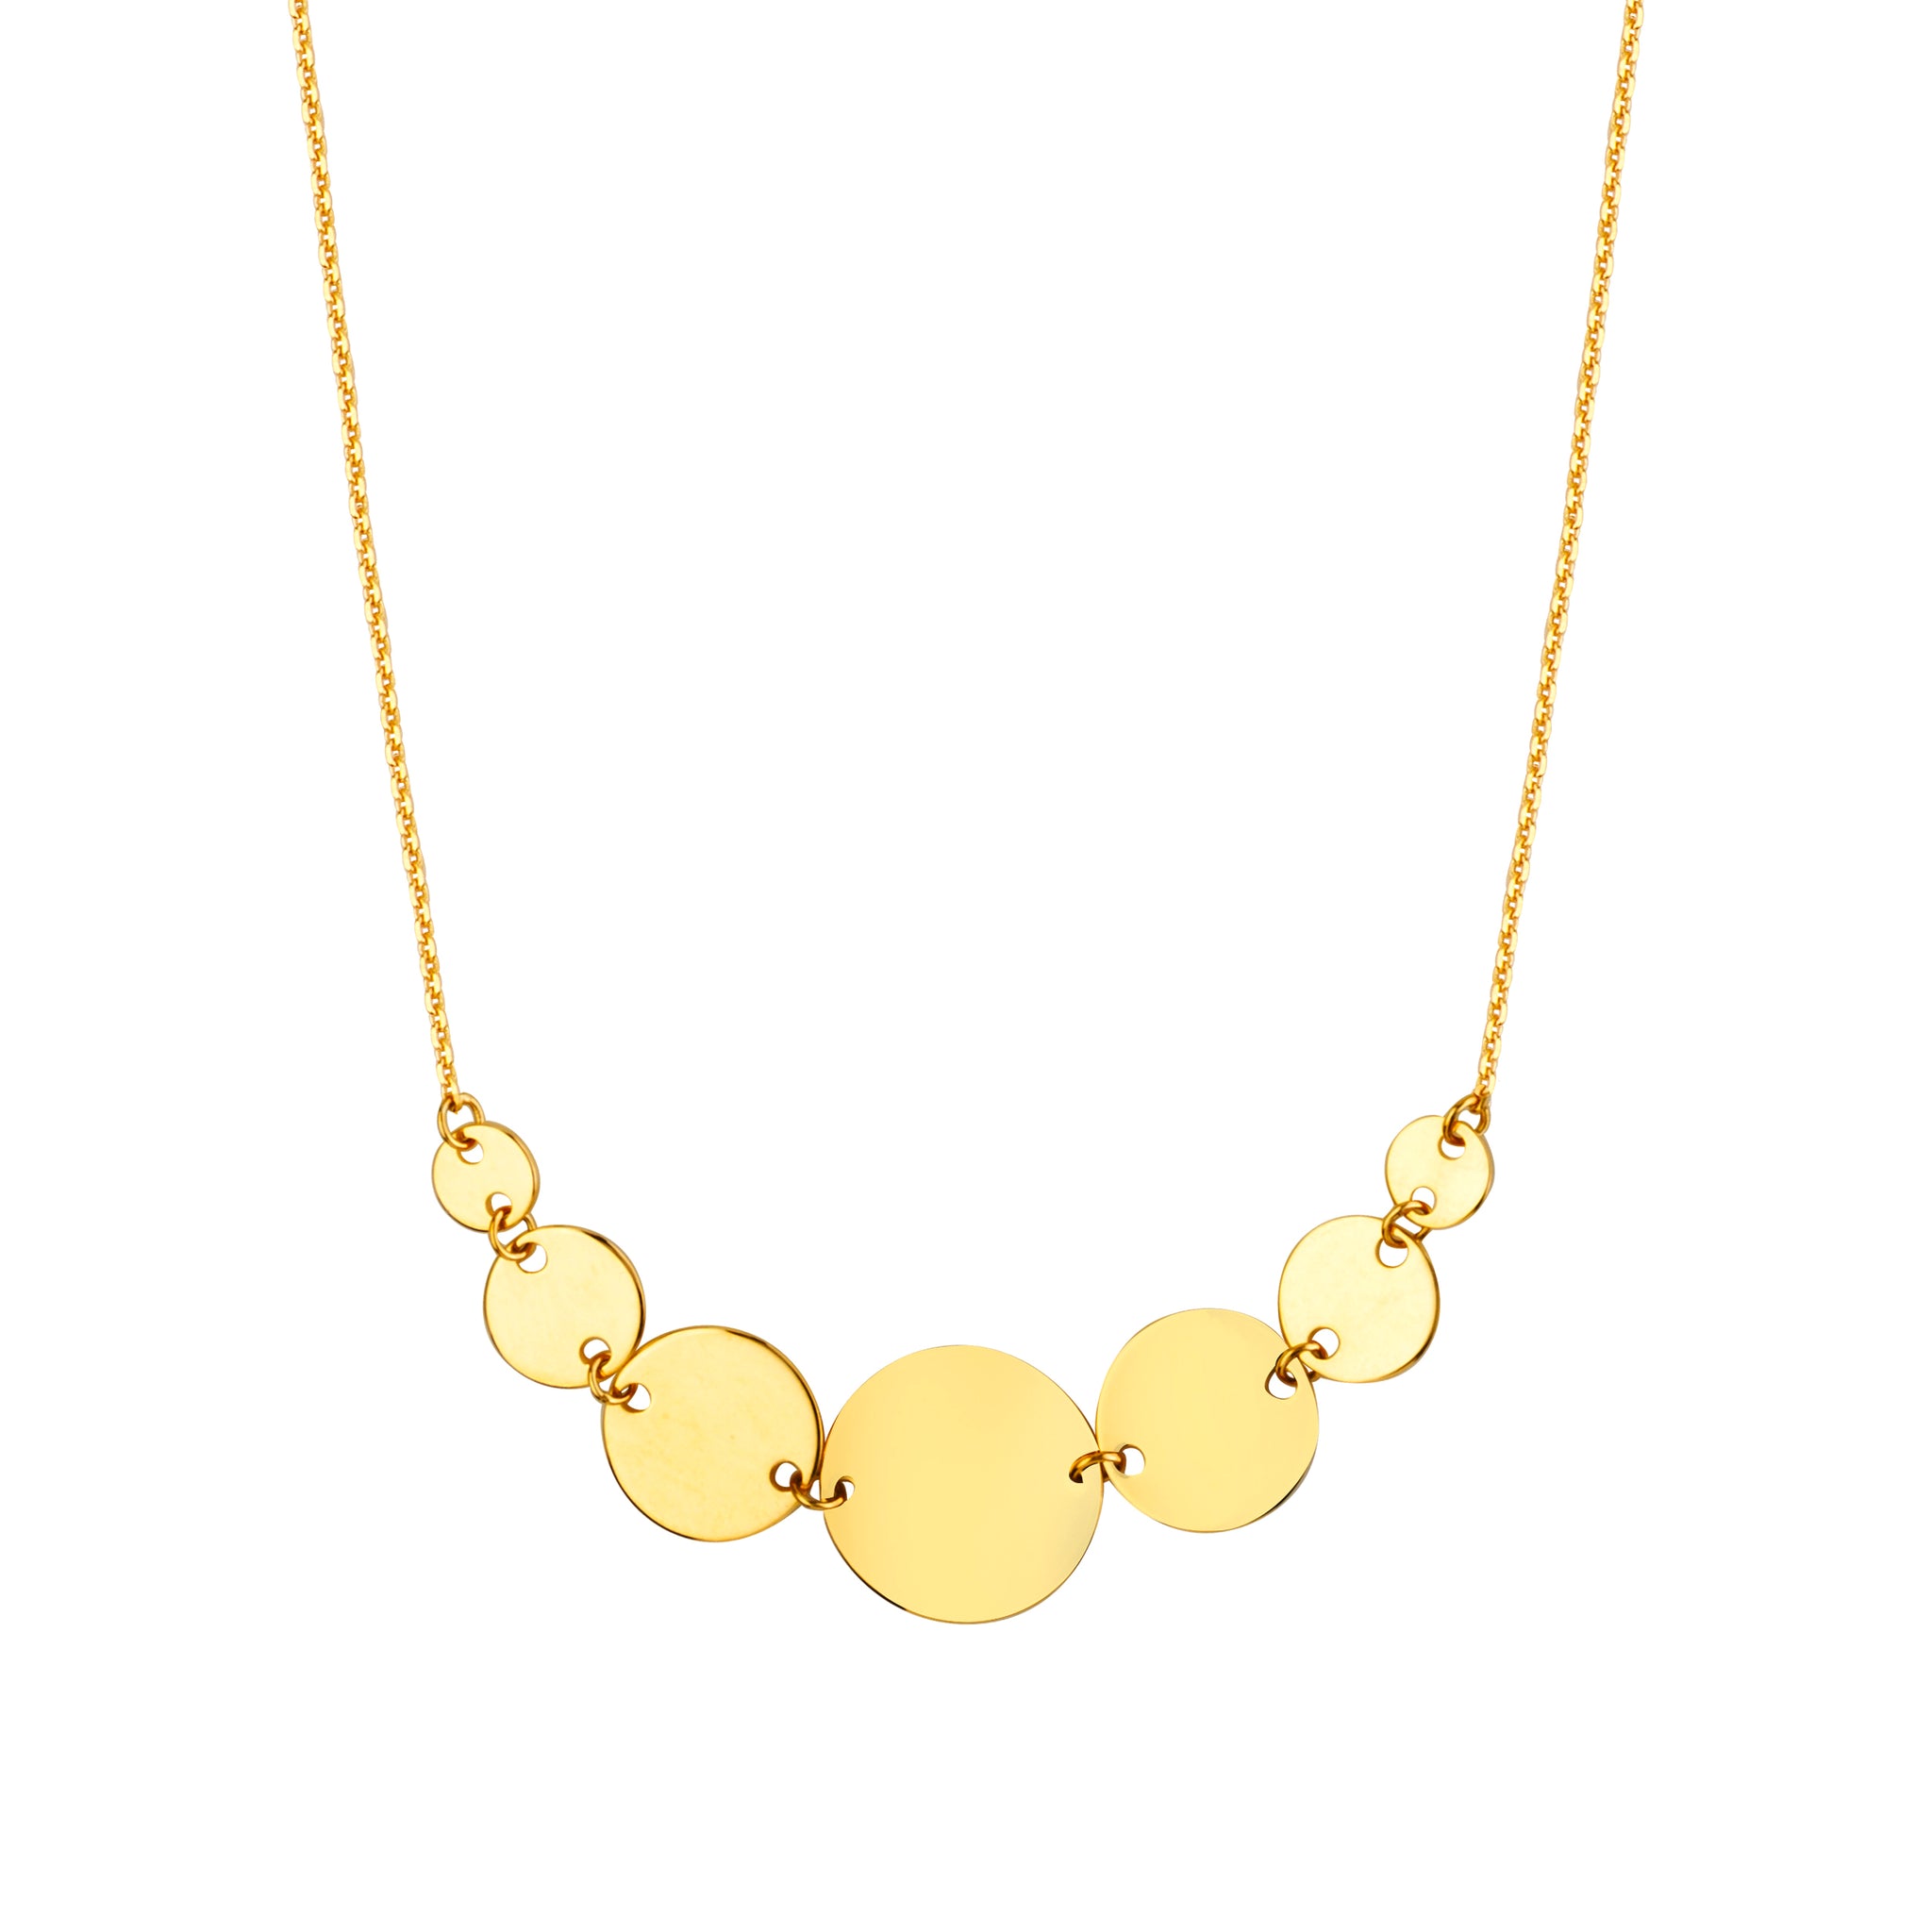 14K Yellow Gold Graduated Disc Adjustable Necklace